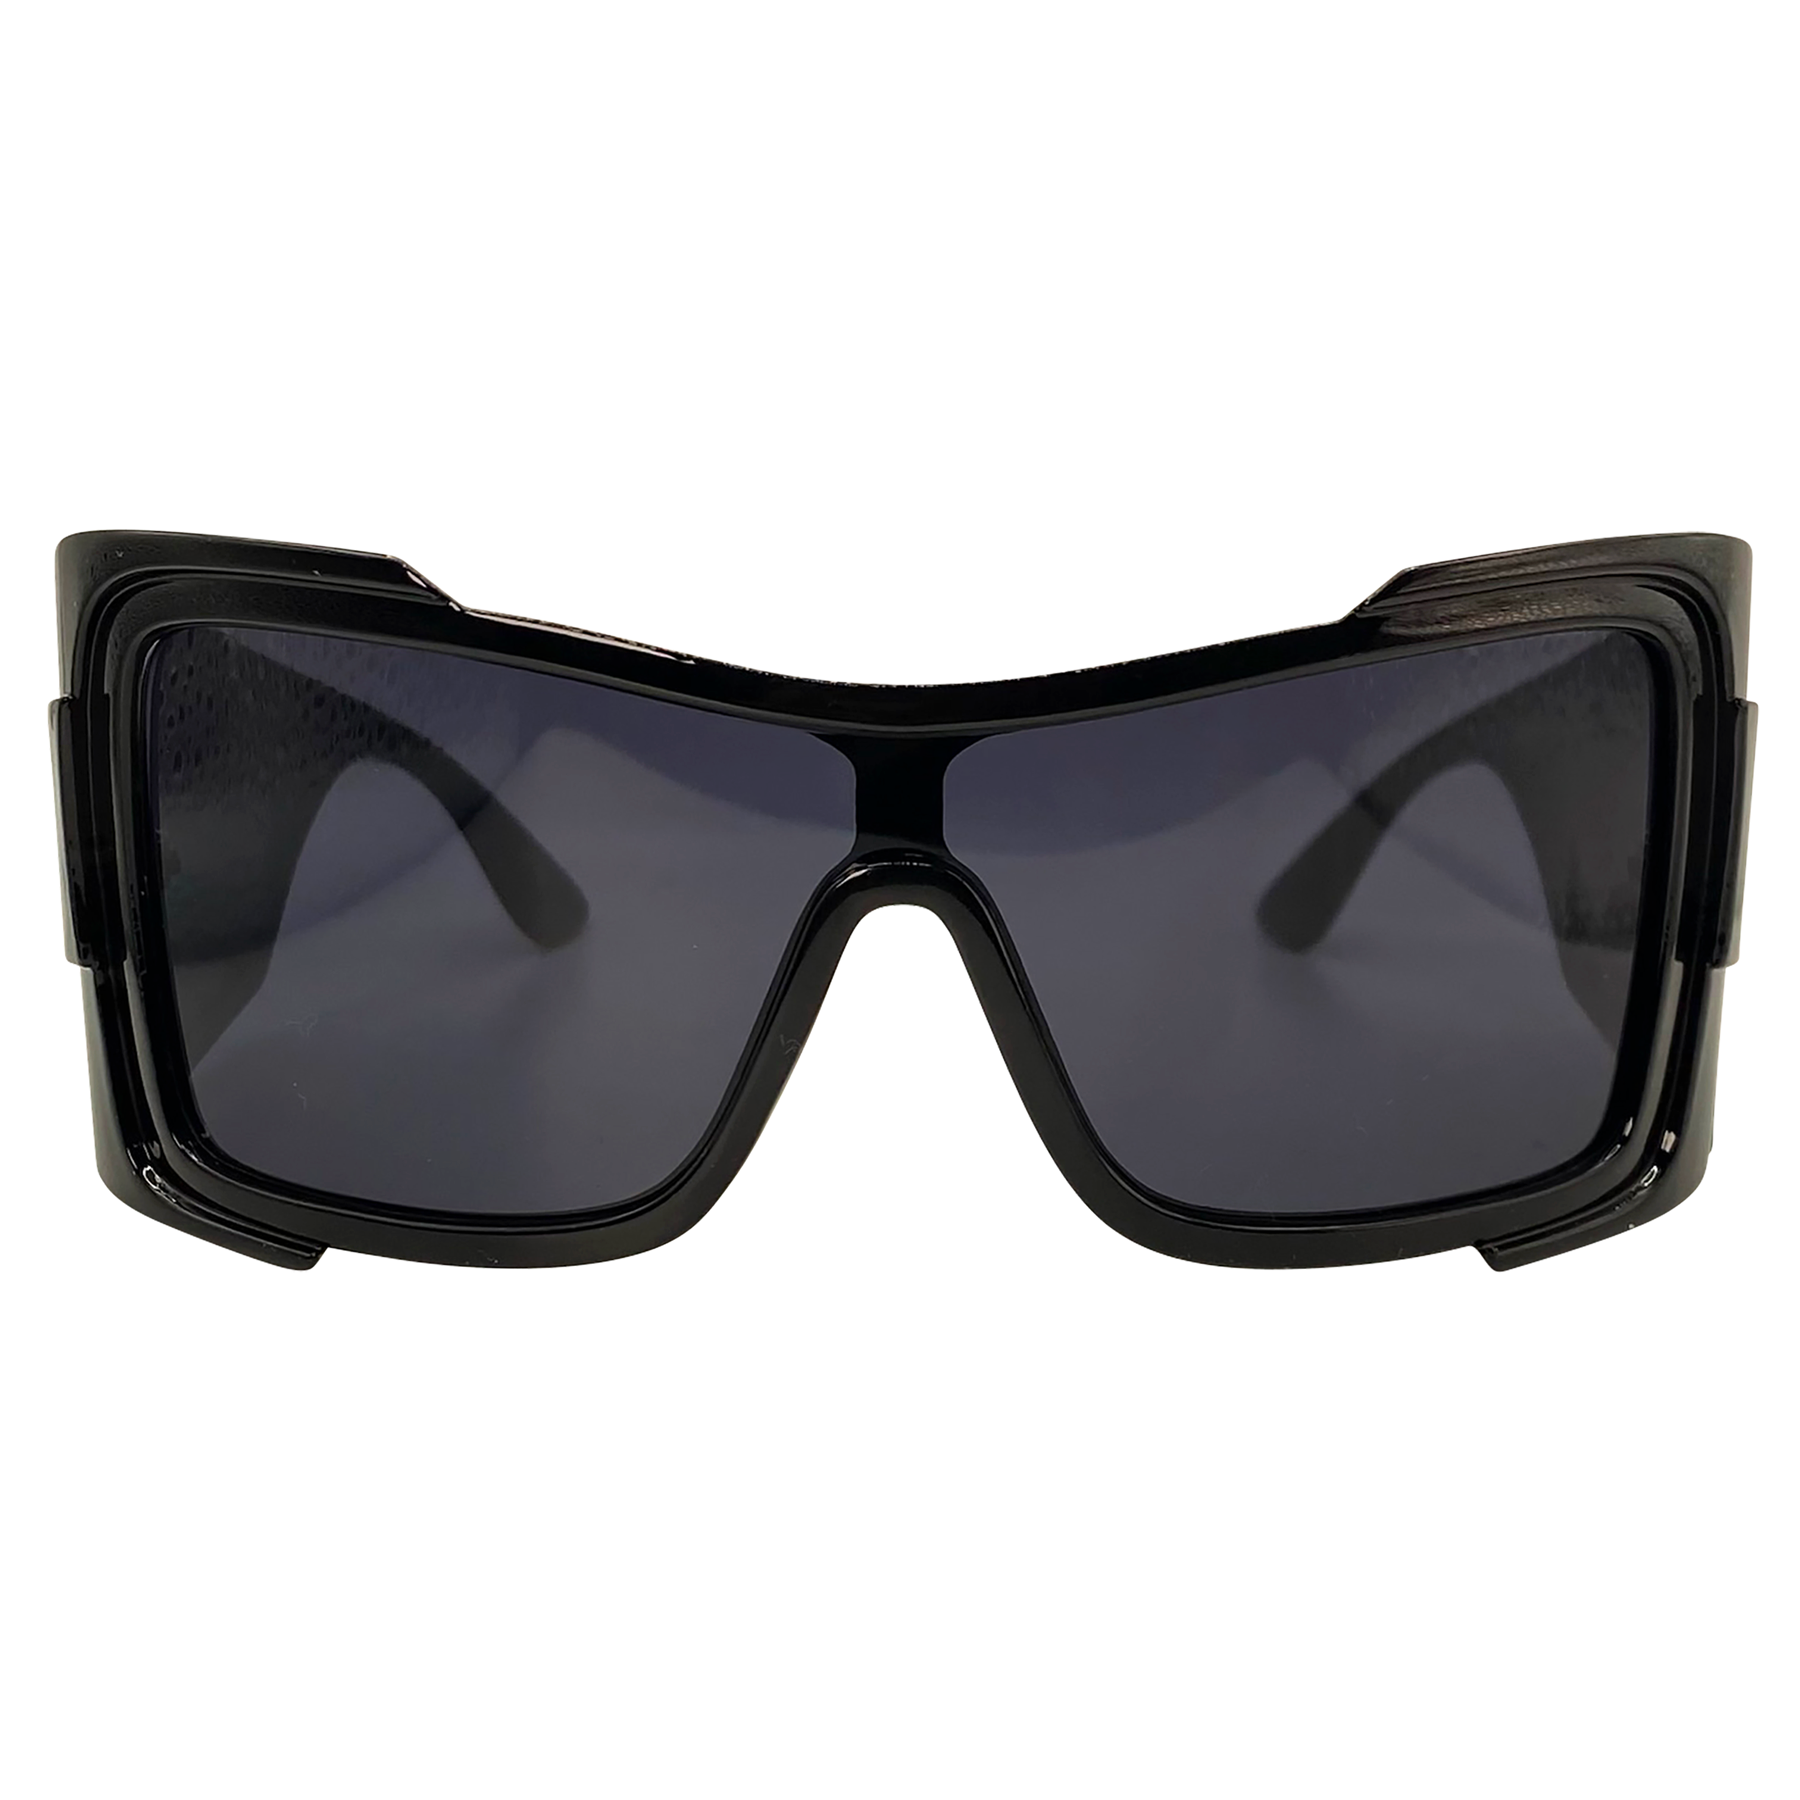 oversized sunglasses with a unique cat-eye square shield style frame